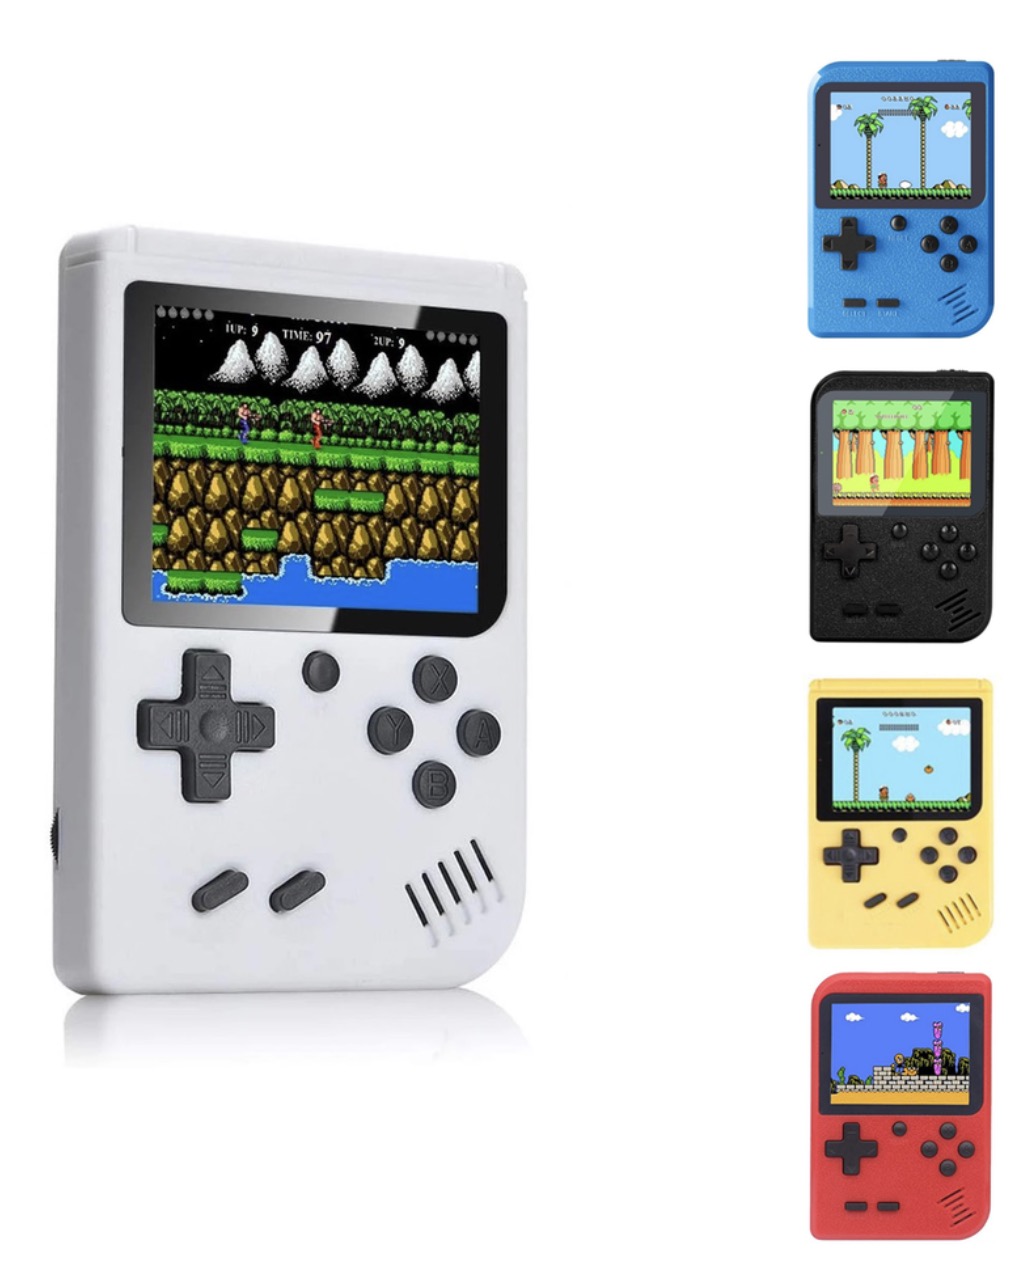 Handheld Sport Console with 400 Constructed-in Video games solely $14.99 shipped!